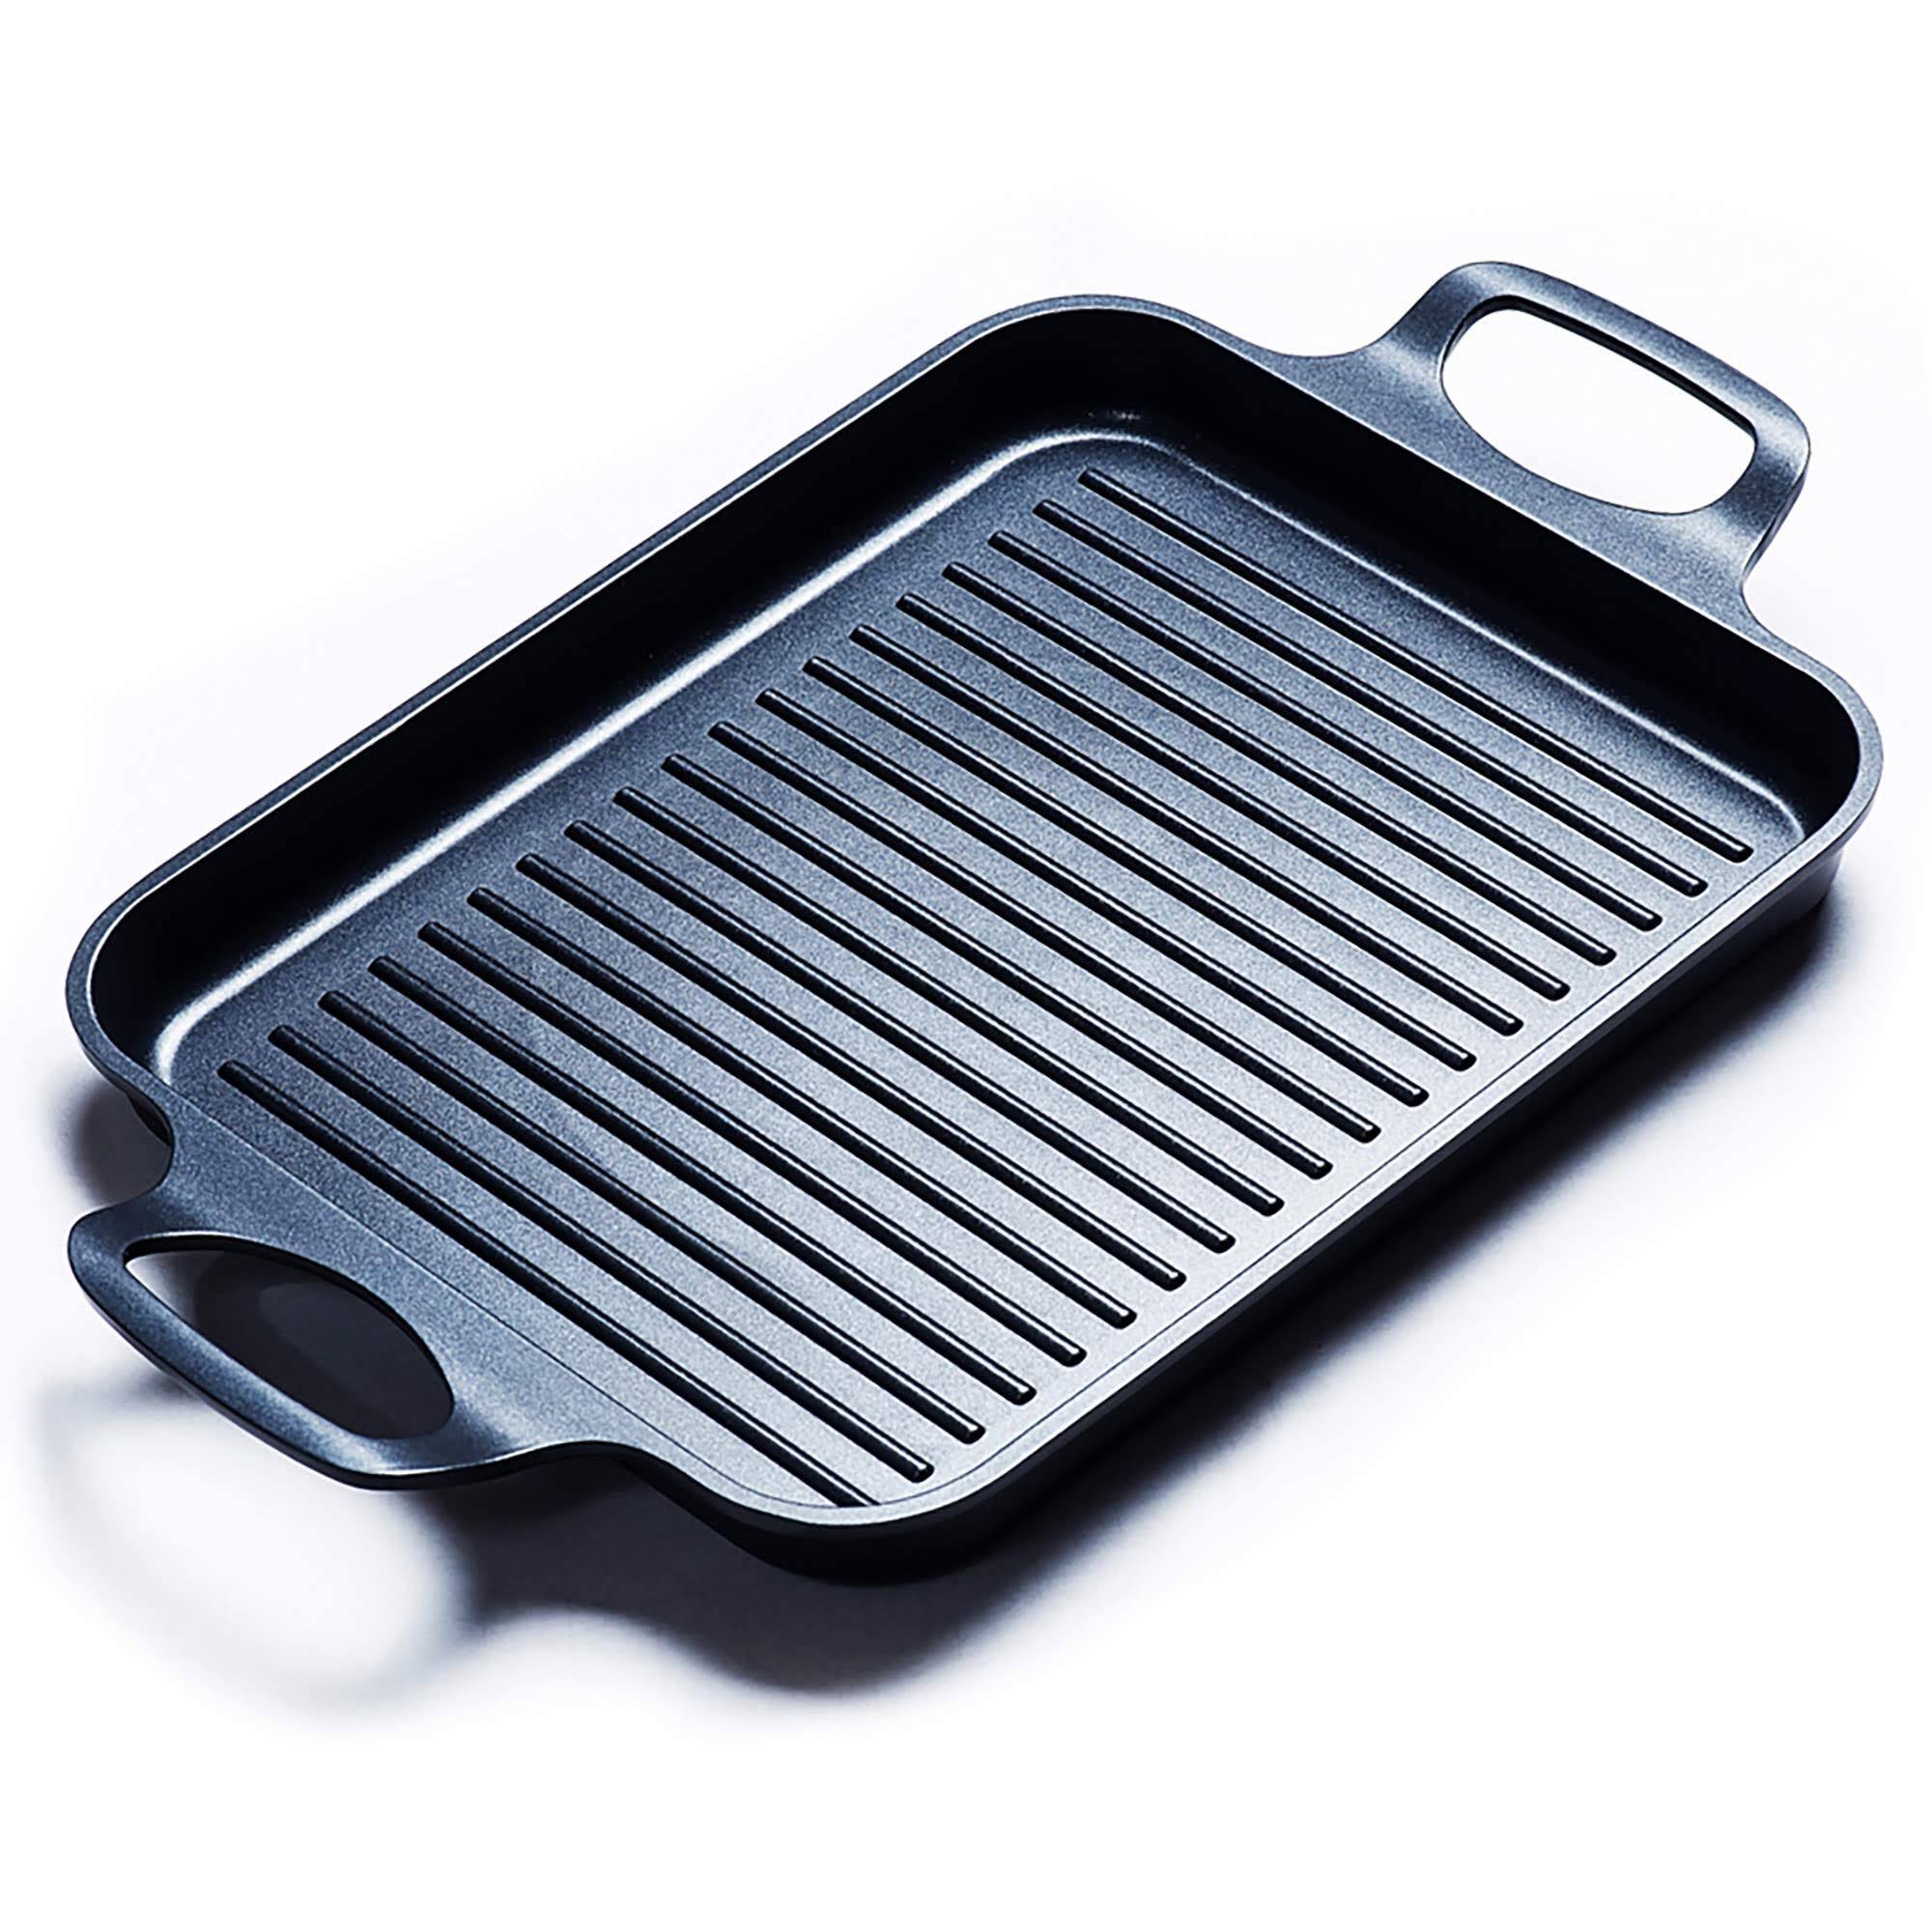 Hard-Anodized Nonstick Griddle Pan for Indoor Grilling | Image